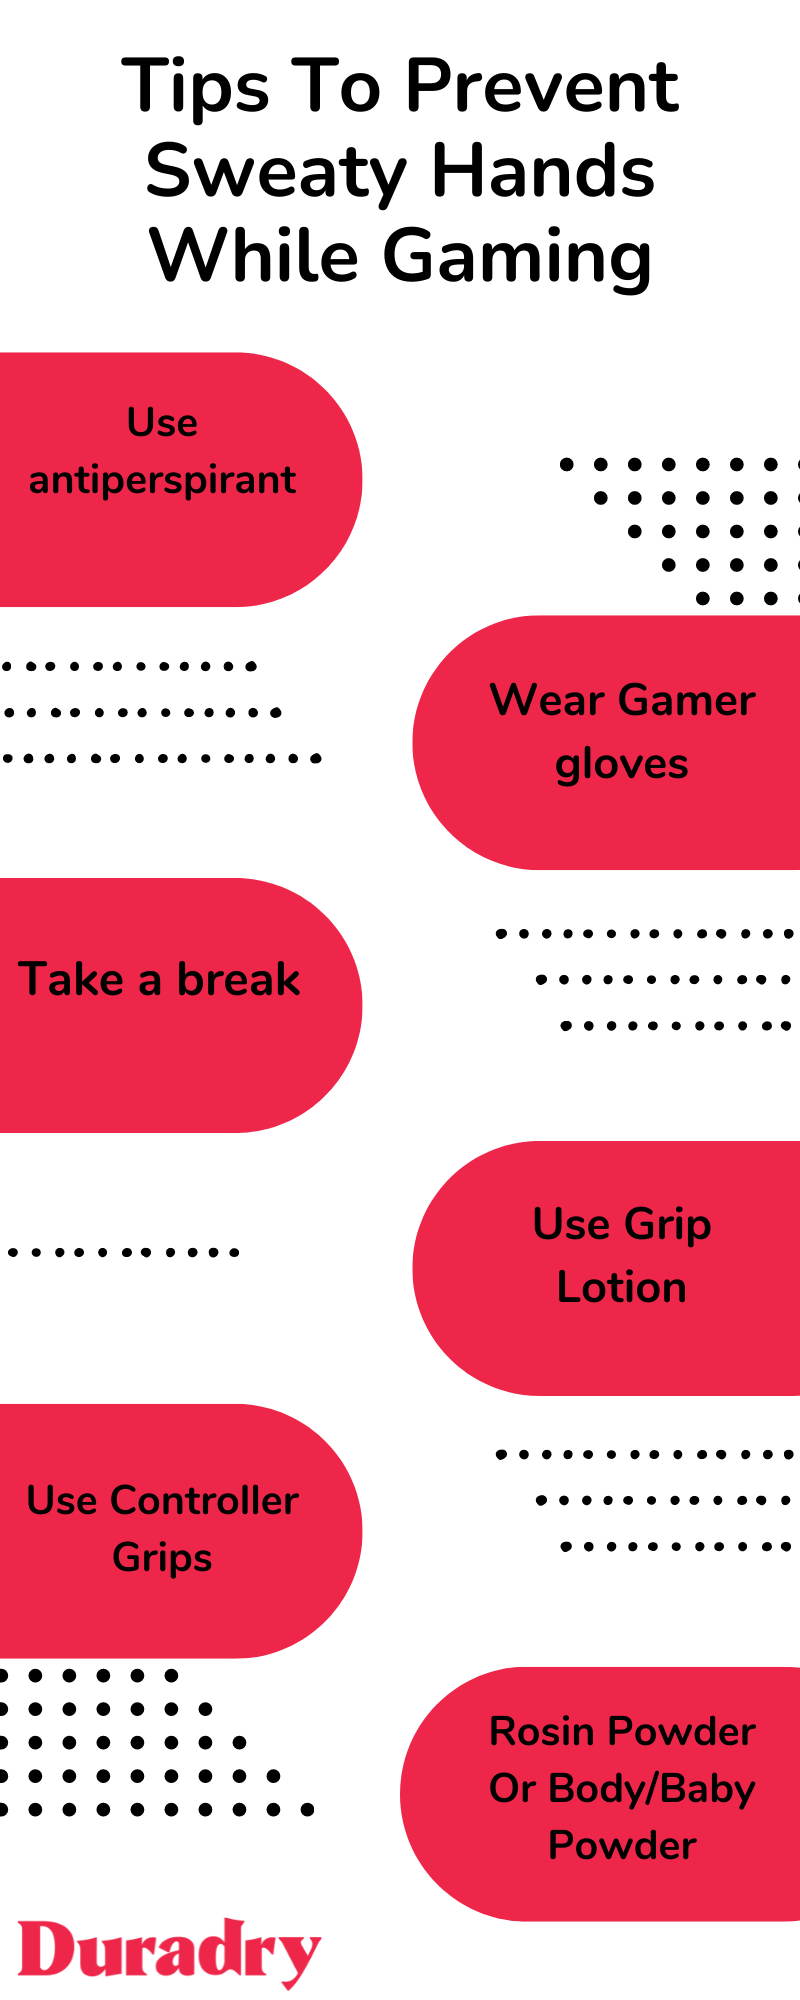 Tips To Prevent Sweaty Hands While Gaming